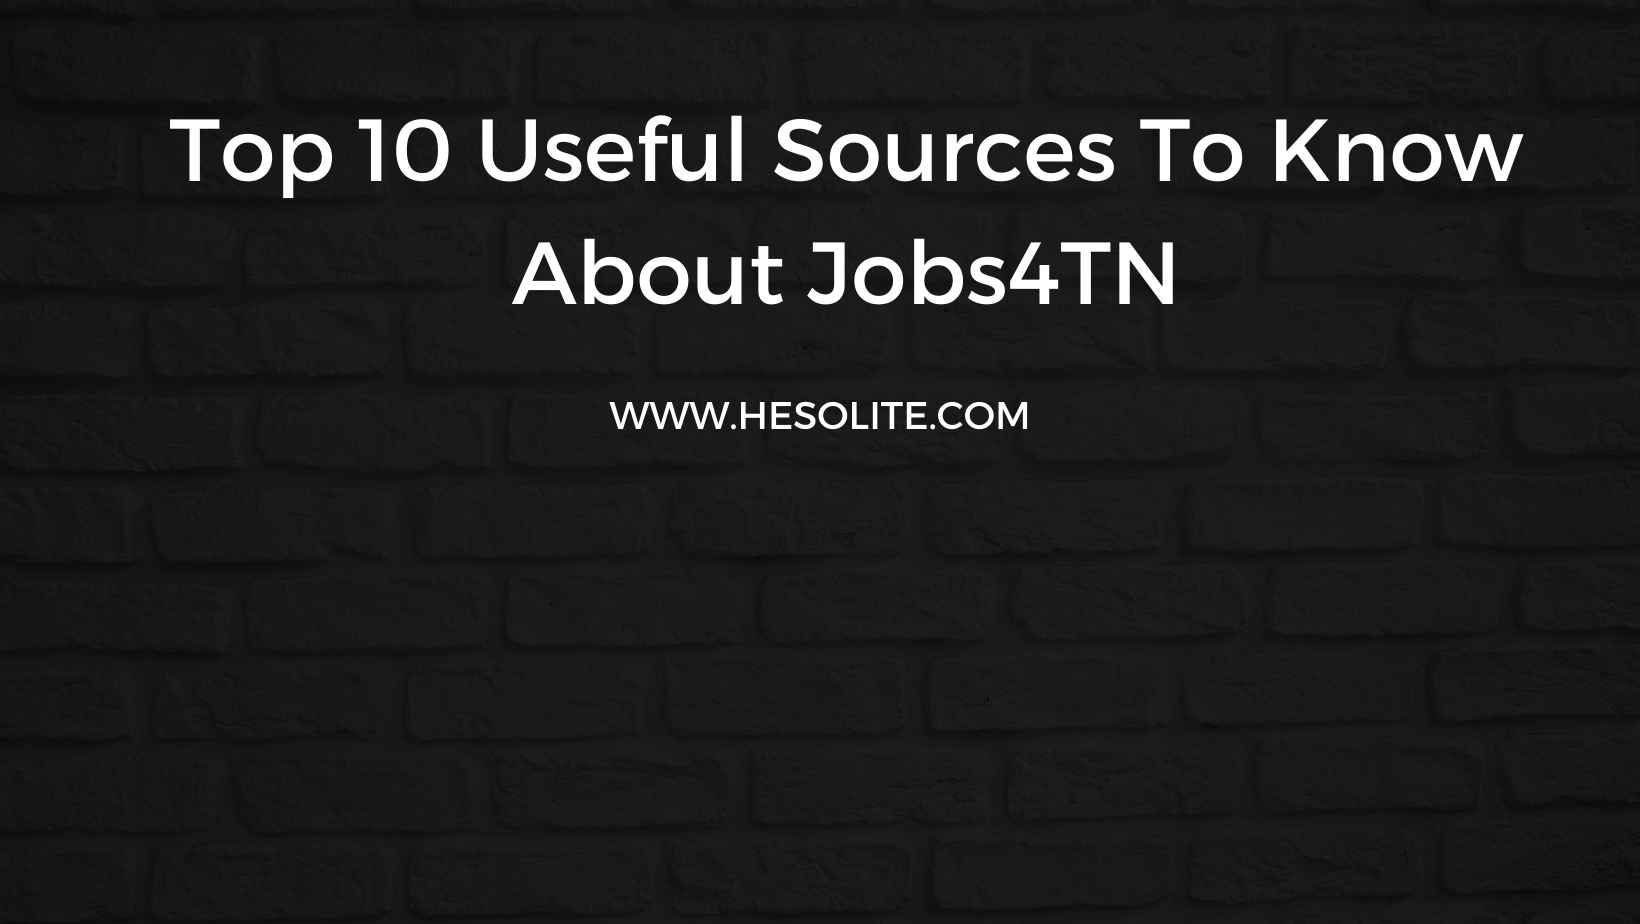 Top 10 Useful Sources To Know About Jobs4TN